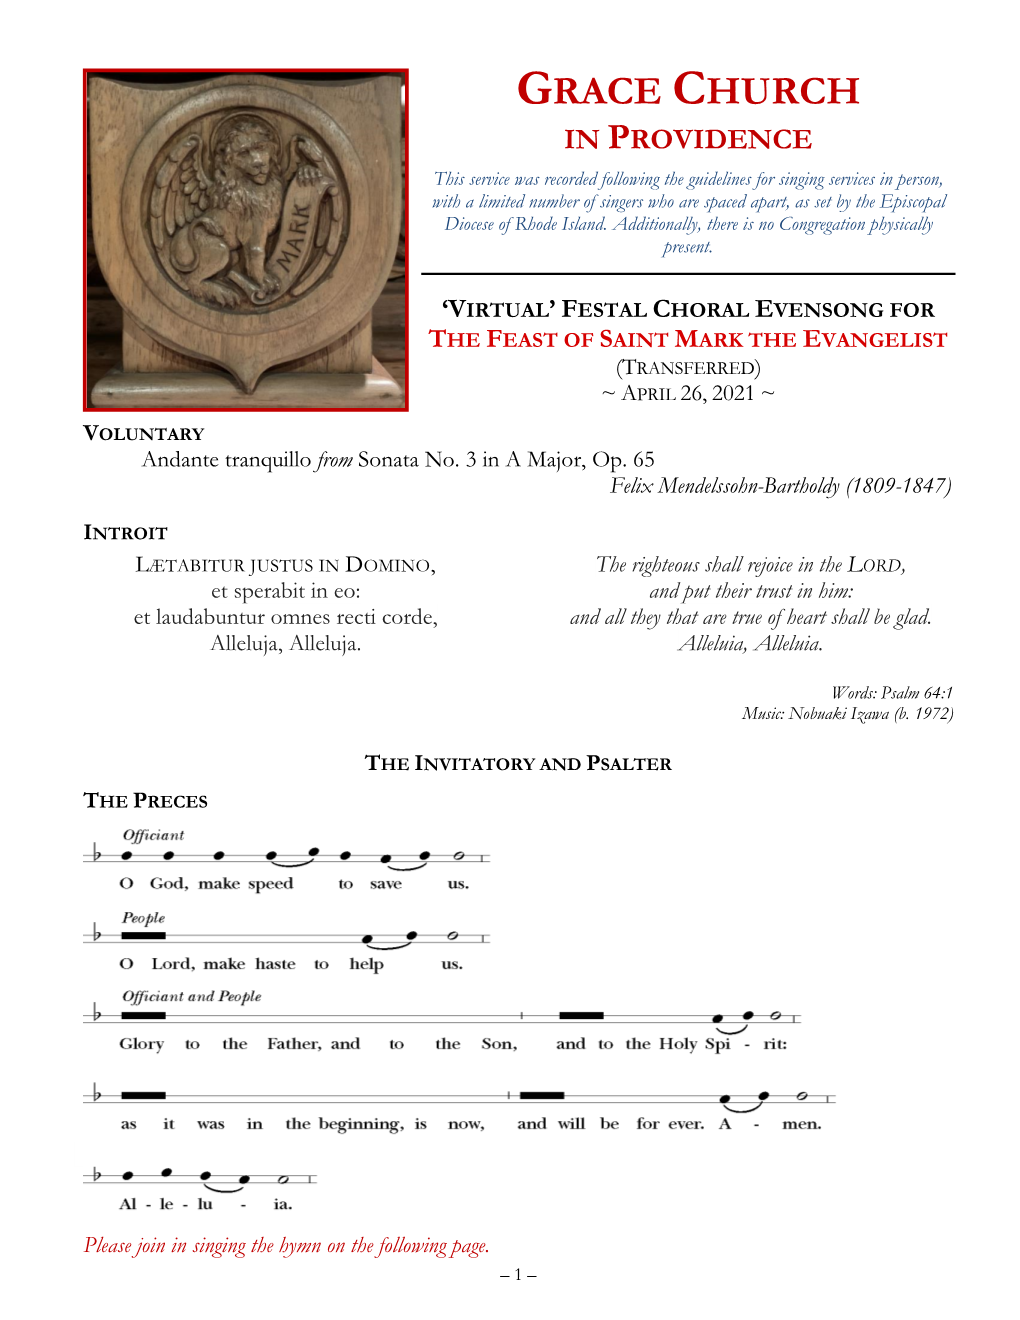 The Order of Service for the Feast of Saint Mark